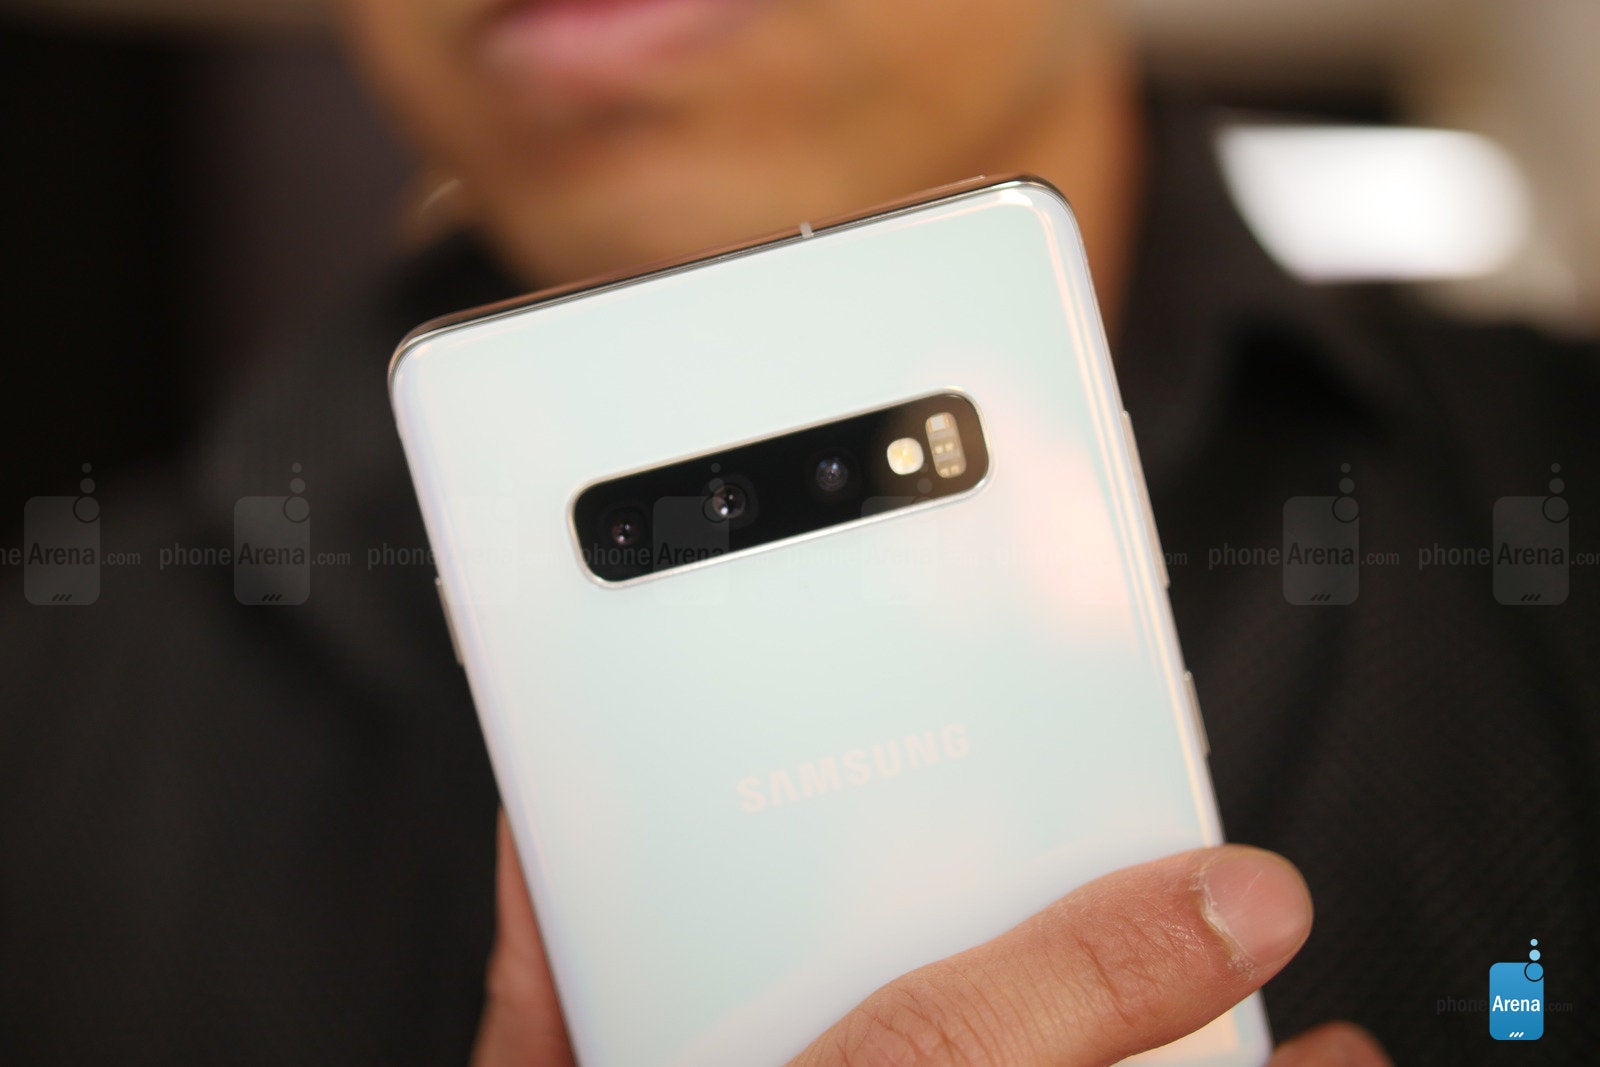 Samsung Galaxy S10 and S10+ hands-on: Back on top of Android